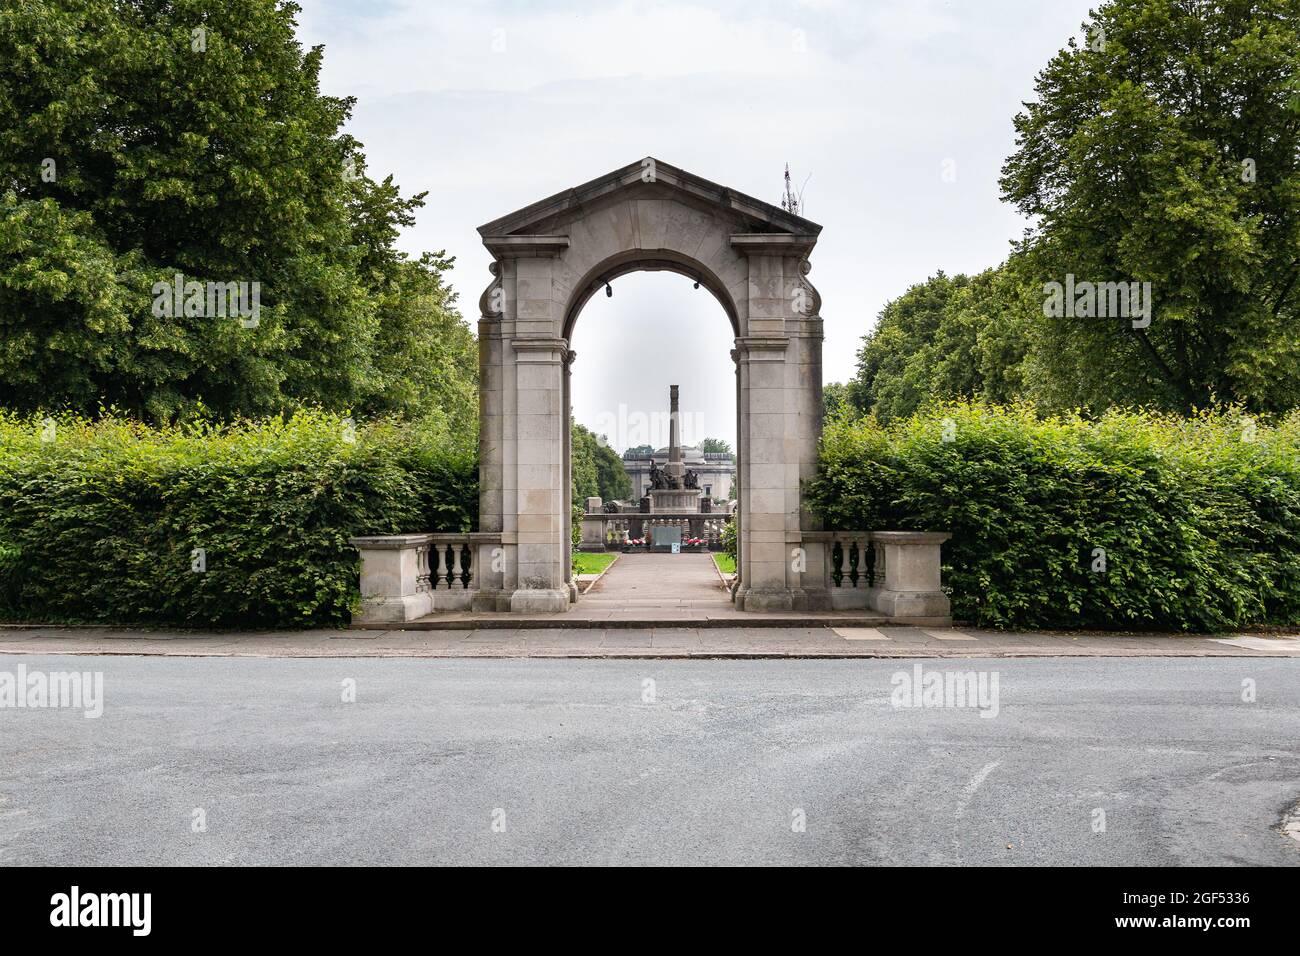 Port Sunlight, Wirral, UK: Stone arch entrance to the Hillsborough Memorial garden, junction of Queen Mary's Drive and Jubilee Crescent Stock Photo